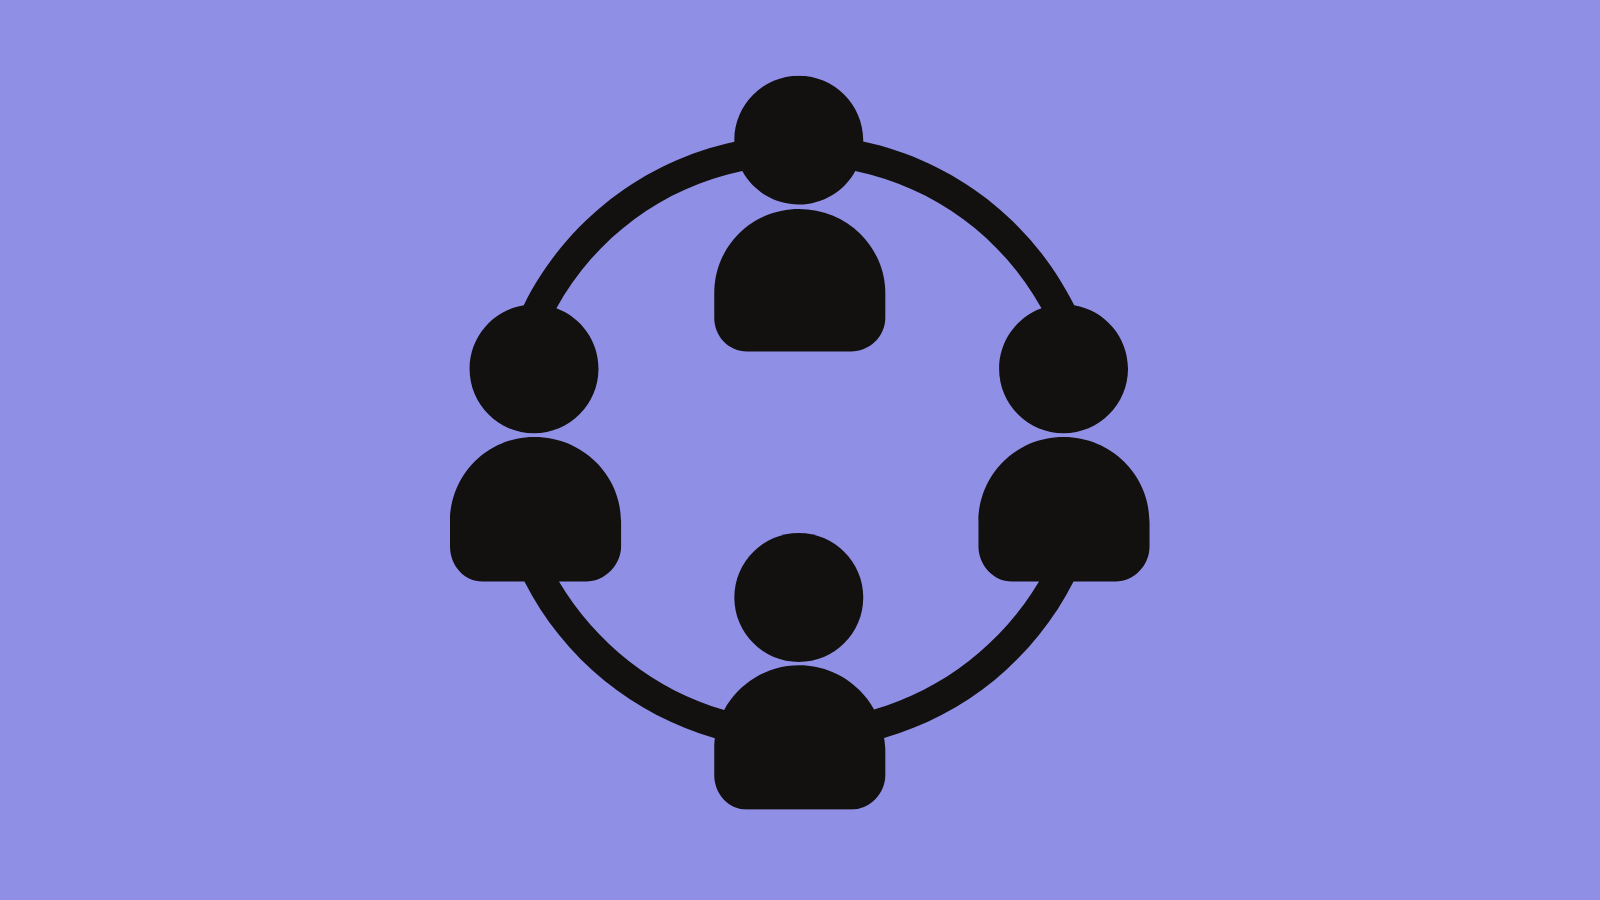 A circle connecting four people